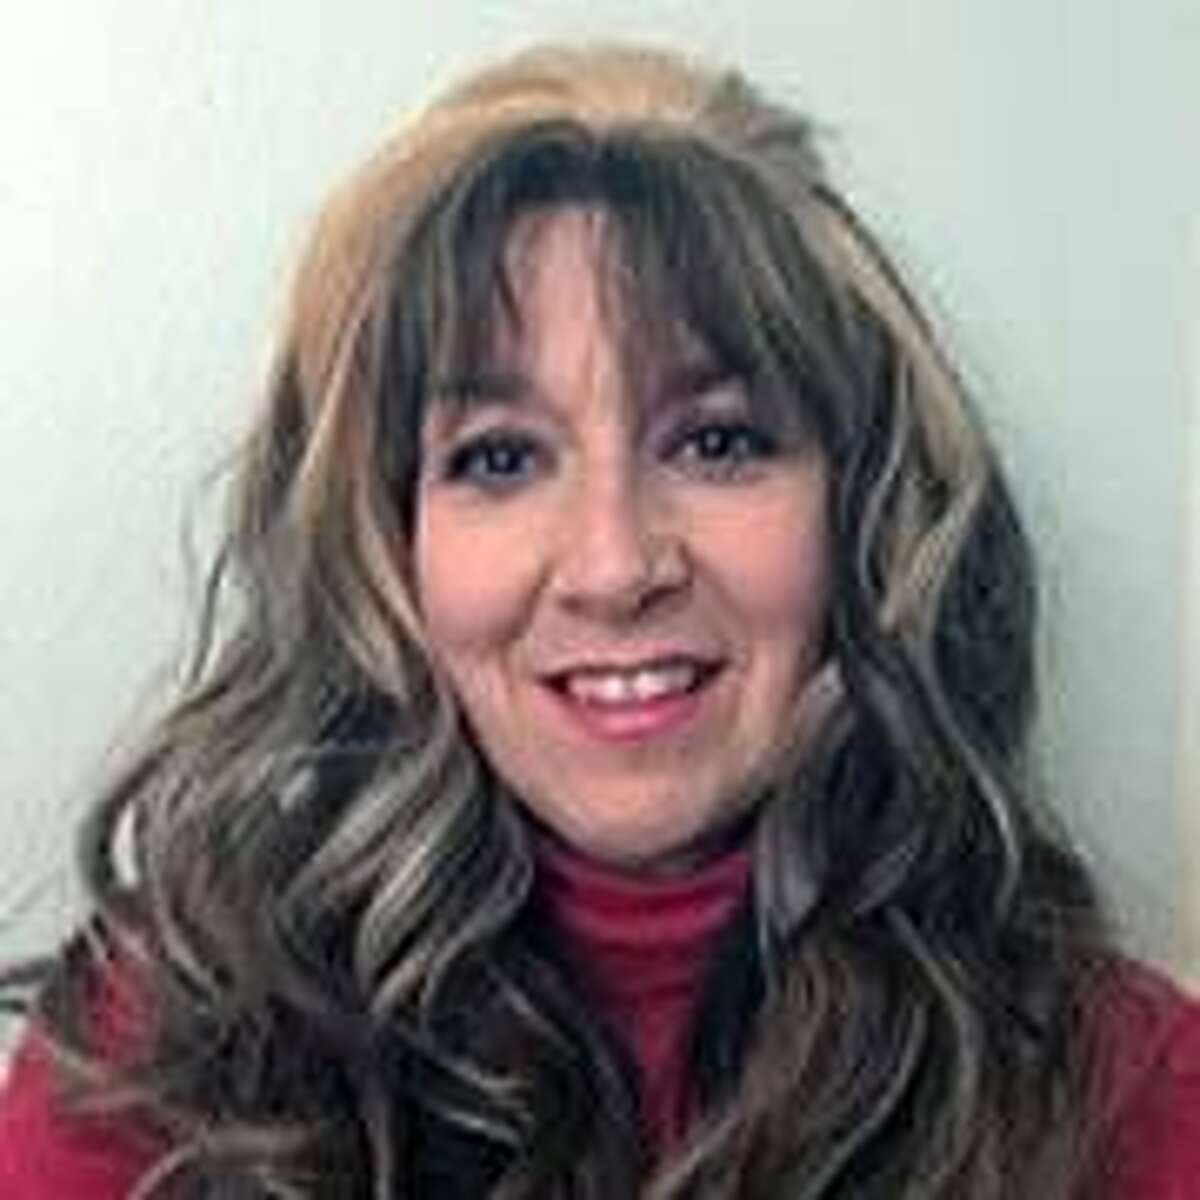 Carol Ann Calderon is a third-grade teacher at Heritage Elementary School in the Southside Independent School District.